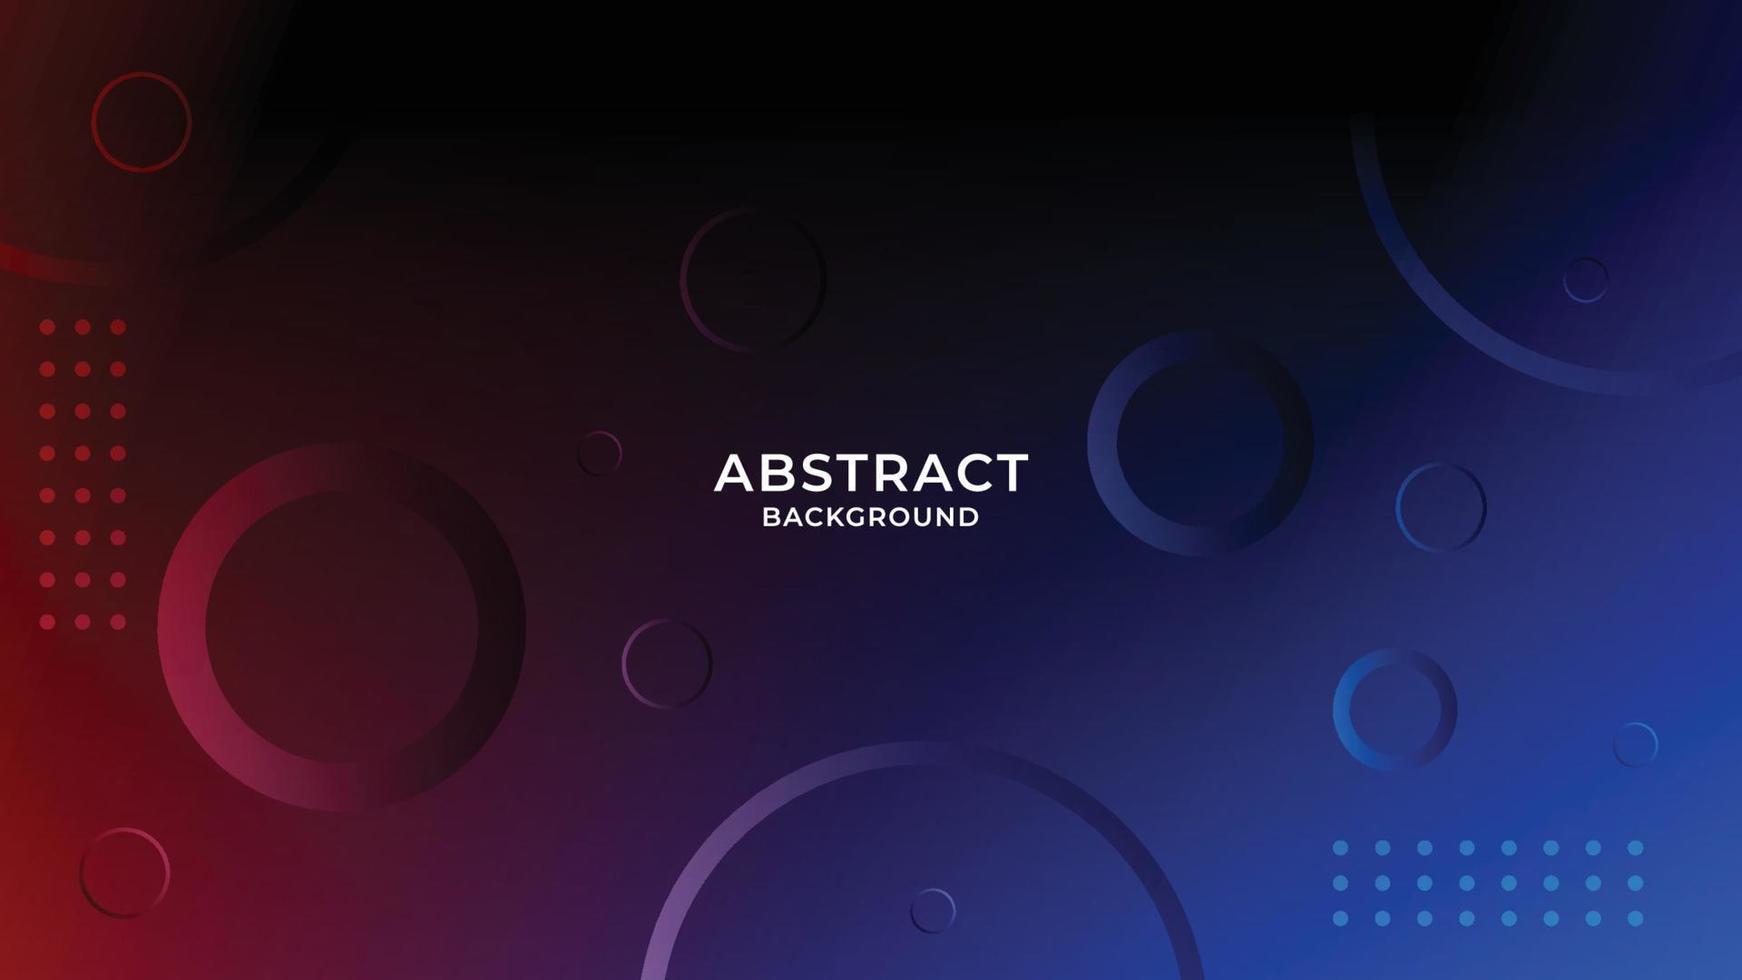 Abstract Background With Circles Design Template vector